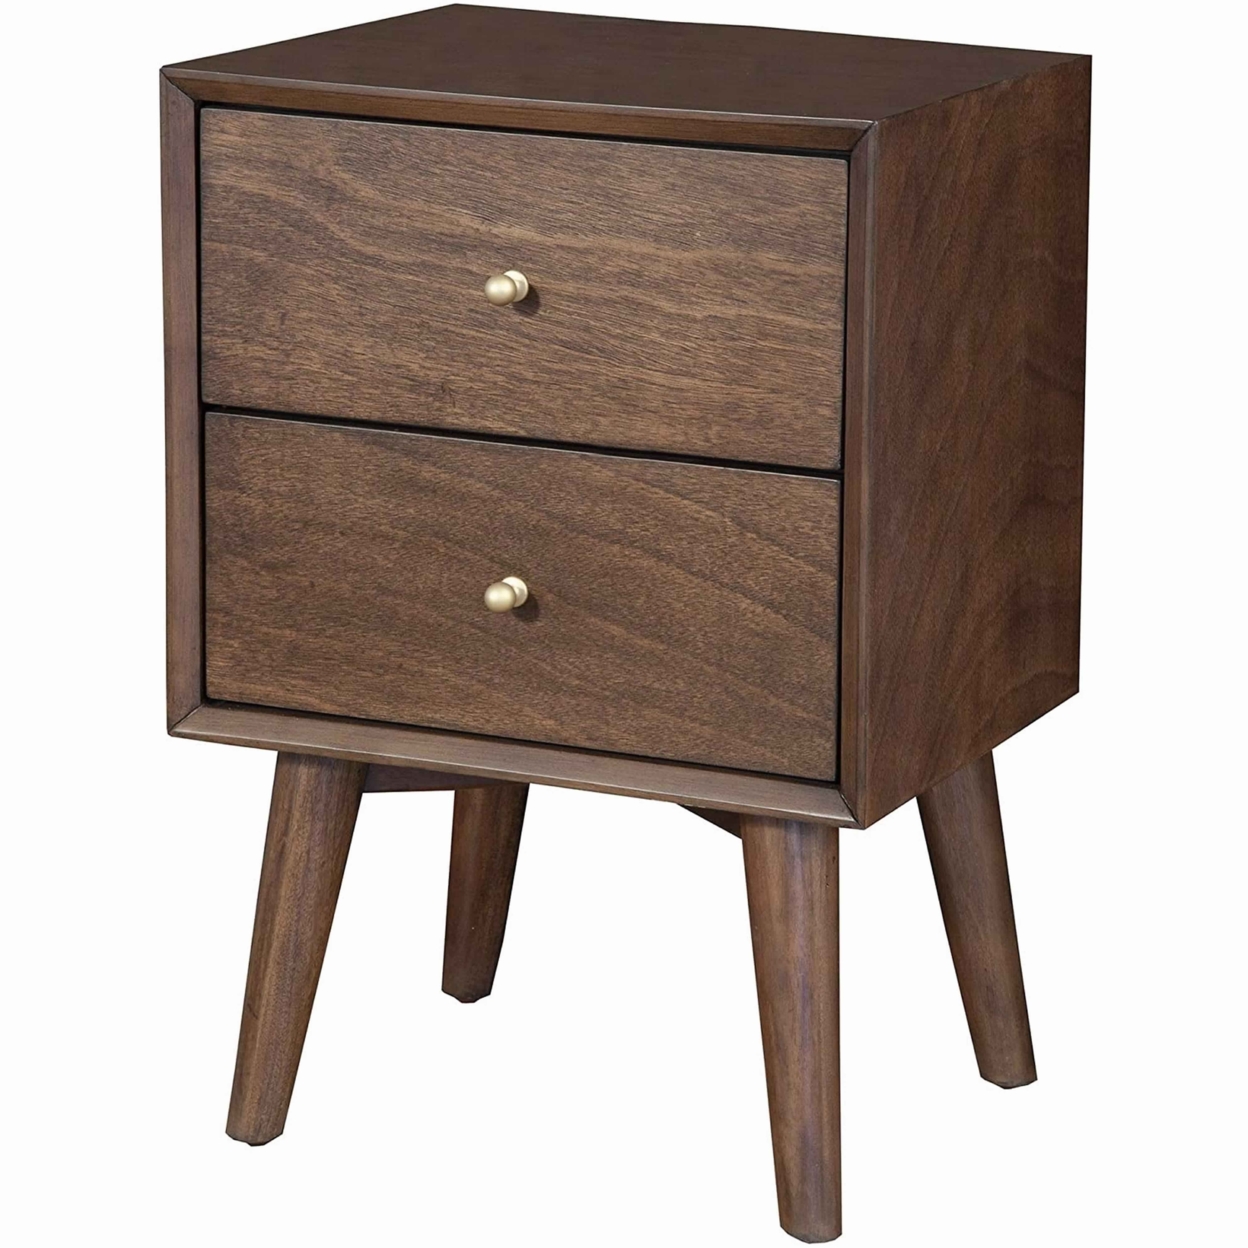 Mid Century Modern Wooden Nightstand With 2 Drawers And Slanted Legs, Brown- Saltoro Sherpi